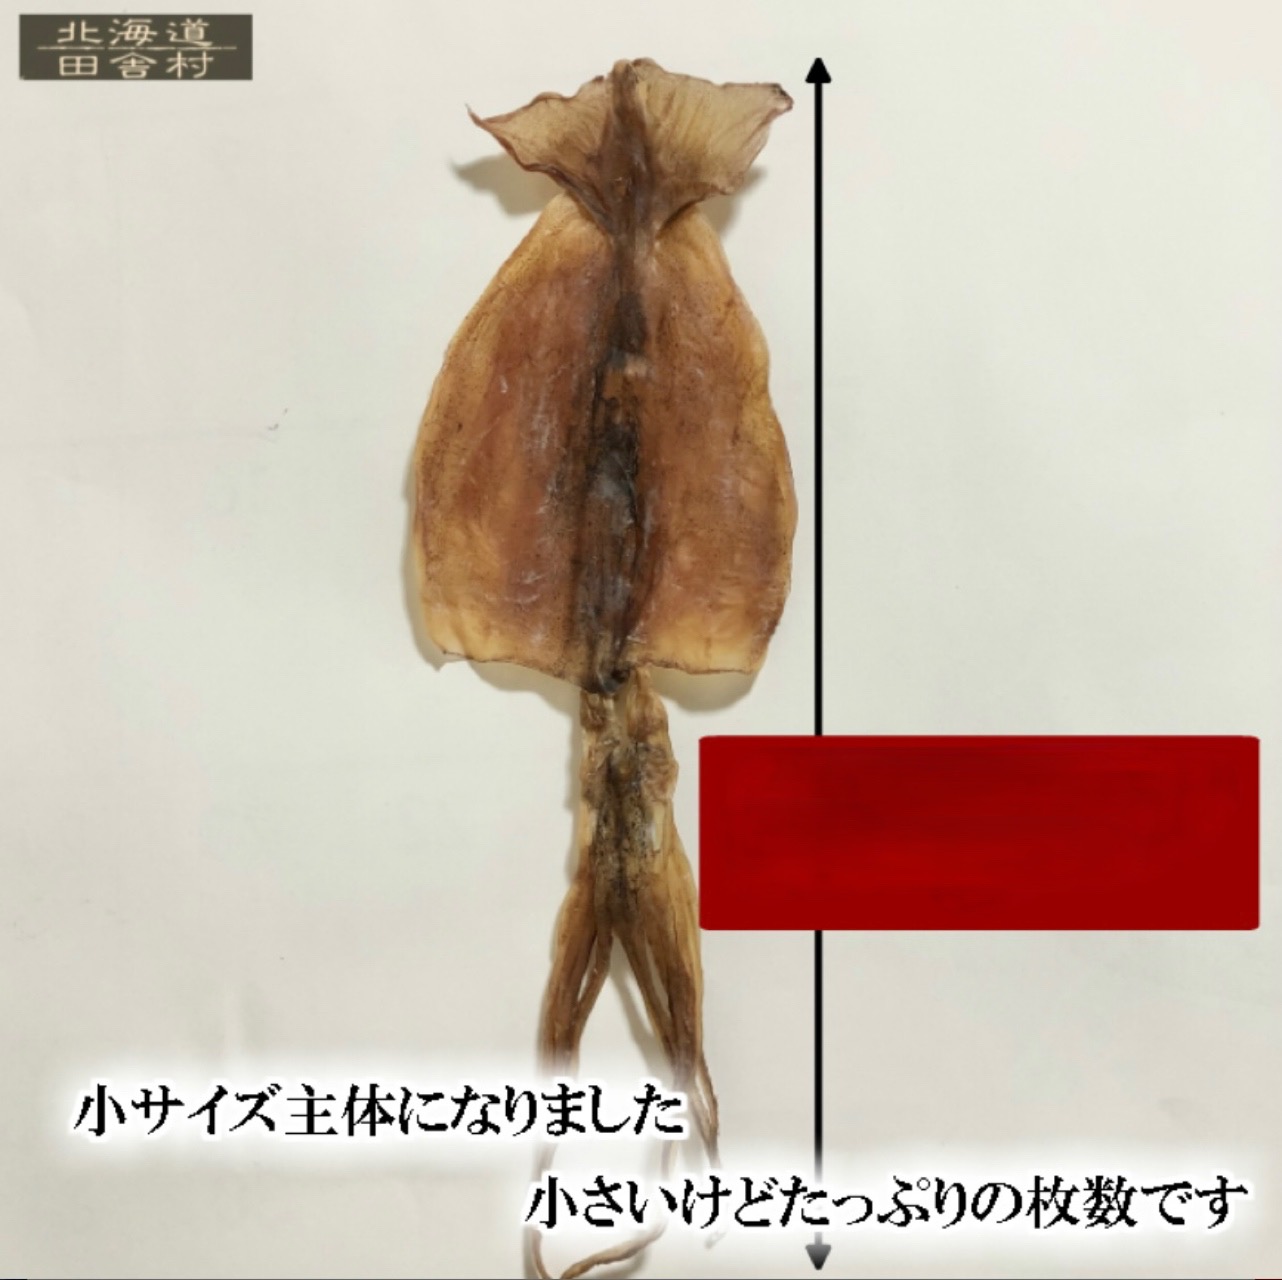  Hokkaido name production Hakodate processing dried squid 130g domestic production moreover, Spain production [ free shipping ].. delicacy small size snack 